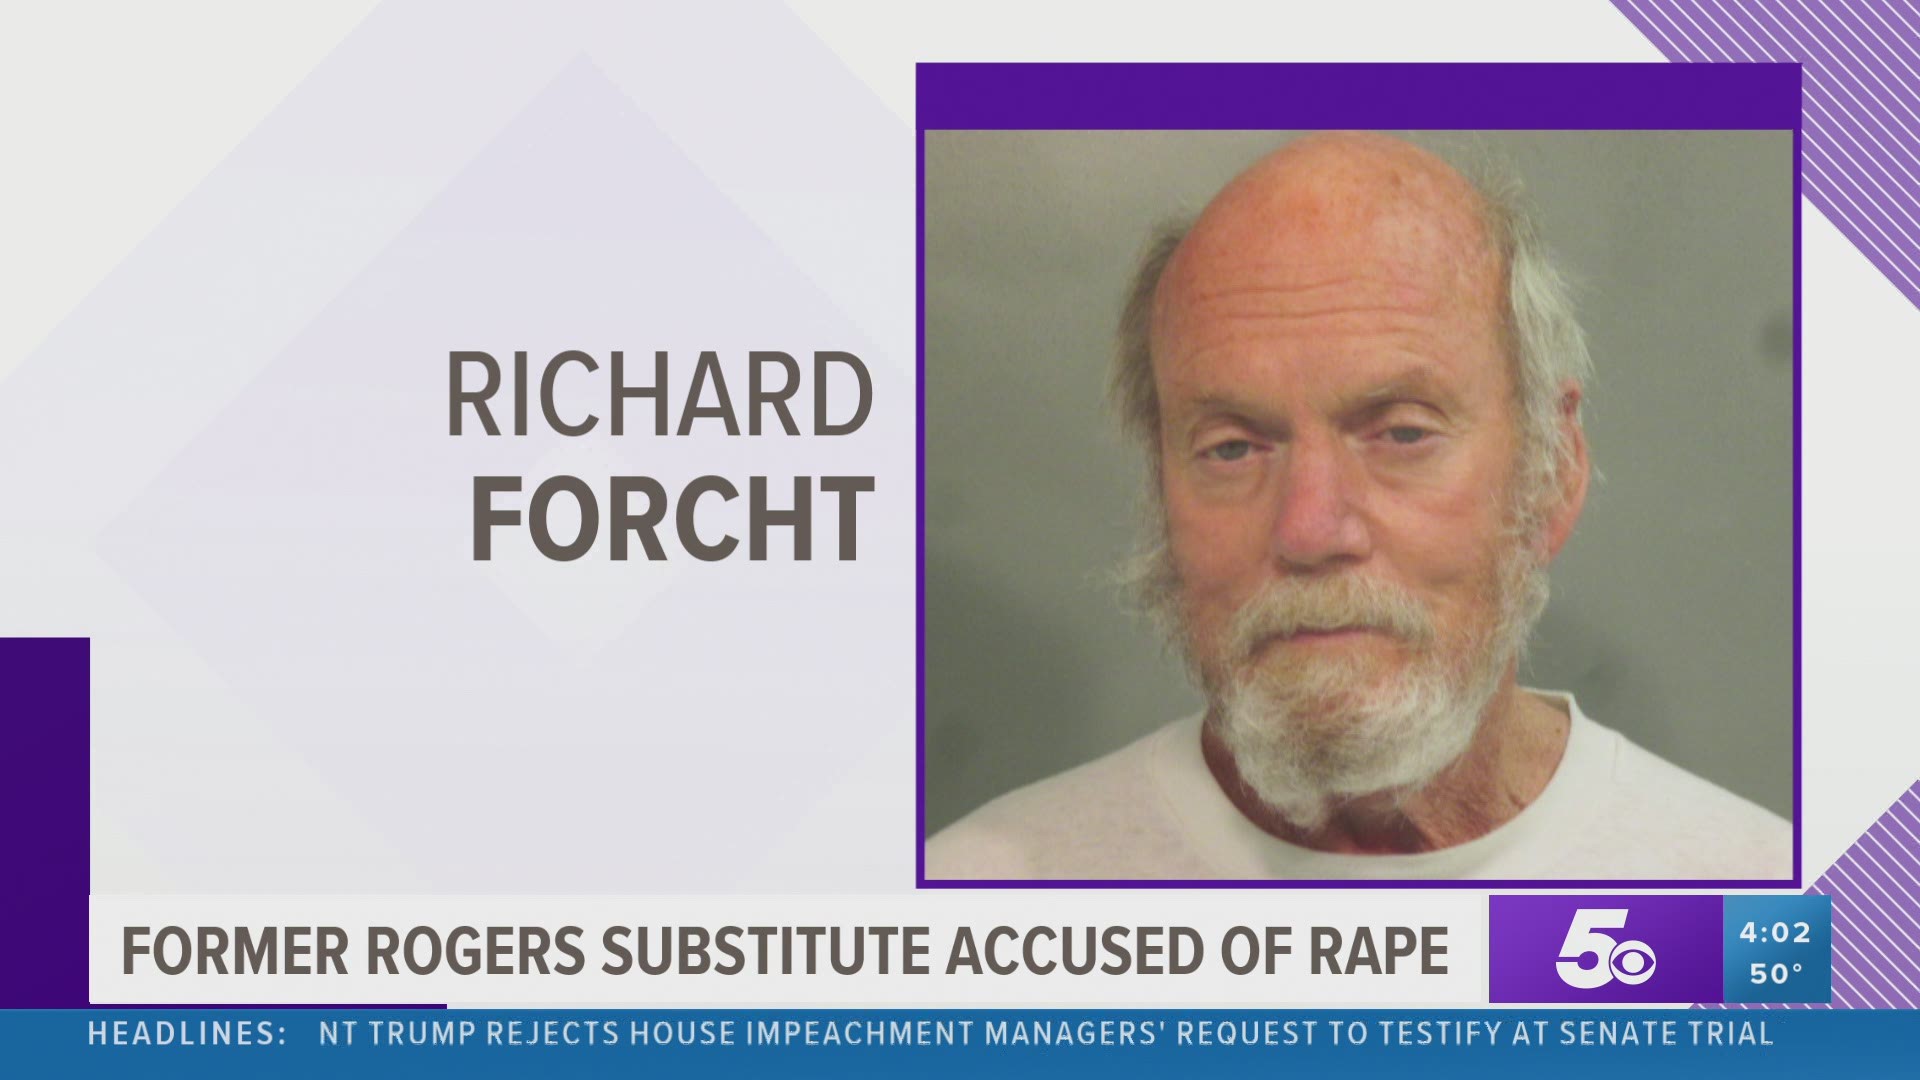 72-year-old Richard Forcht has been arrested and charged with Rape-Forcible Fondling. His arrest is not connected to an incident at a school in Rogers.